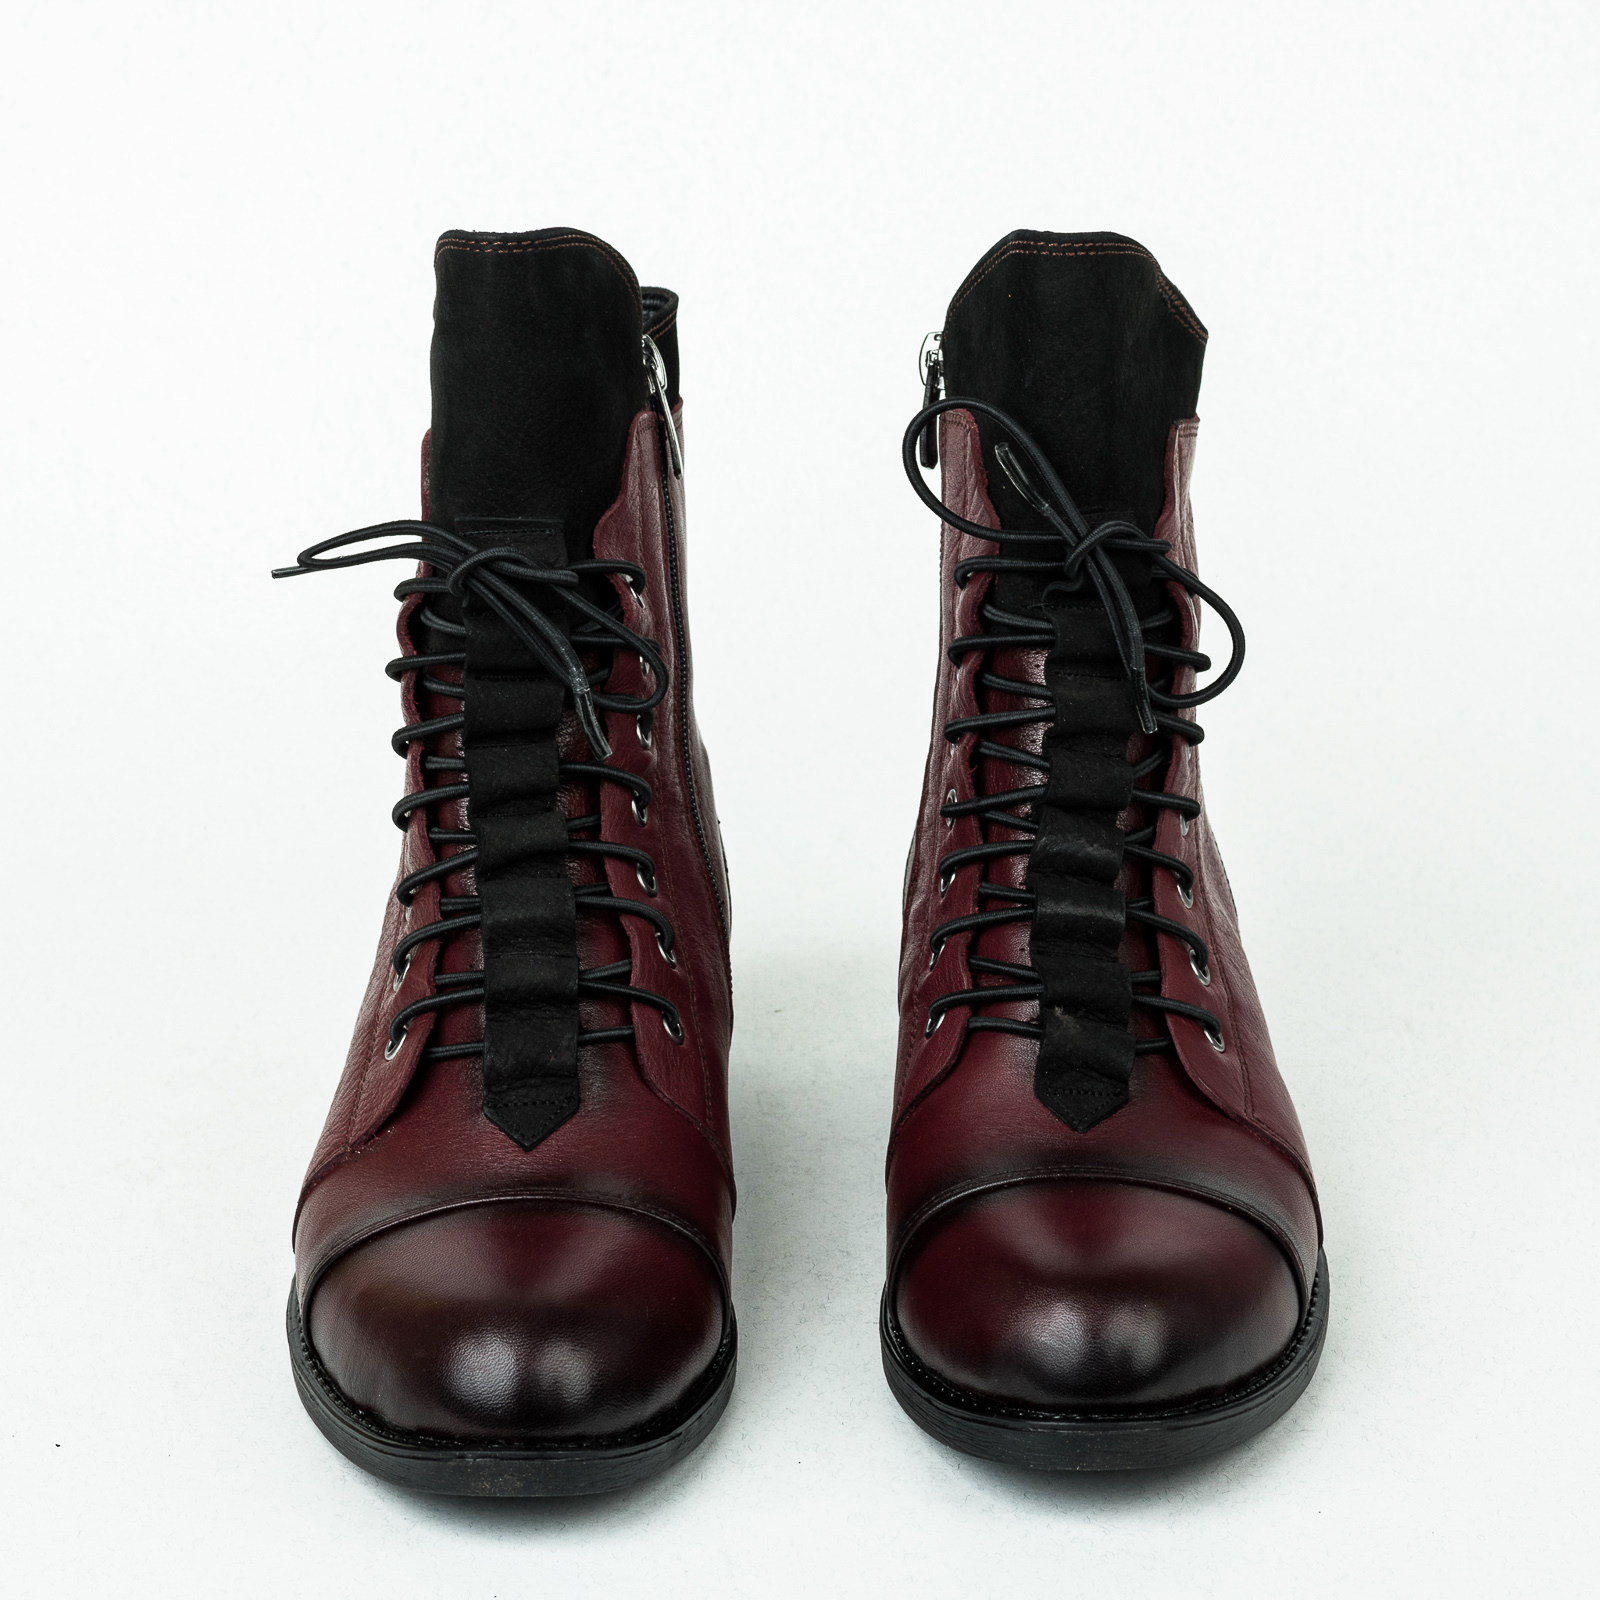 Leather booties B245 - WINE RED